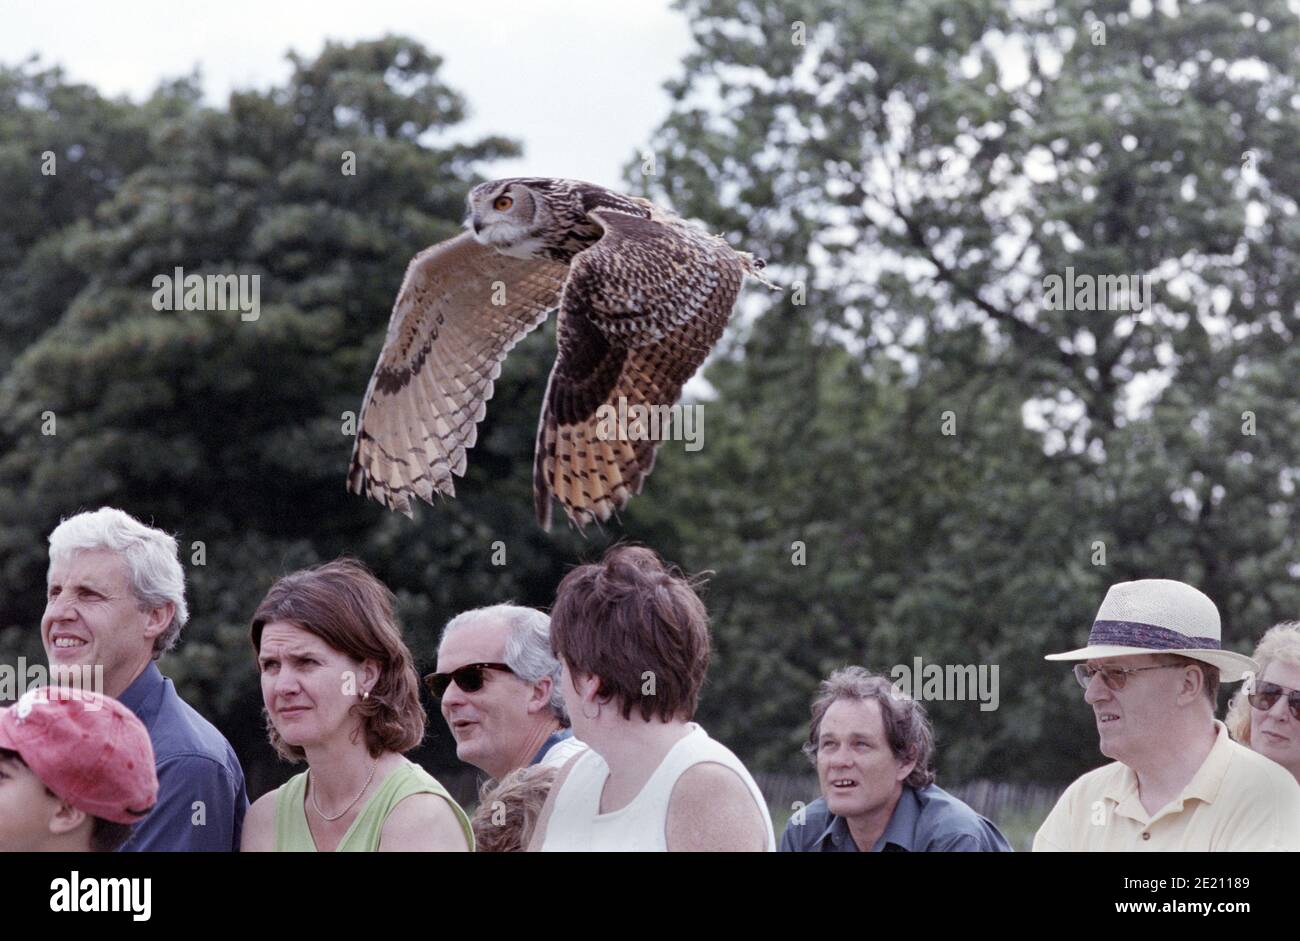 Eagle Owl during a Falconry Demonstration Stock Photo